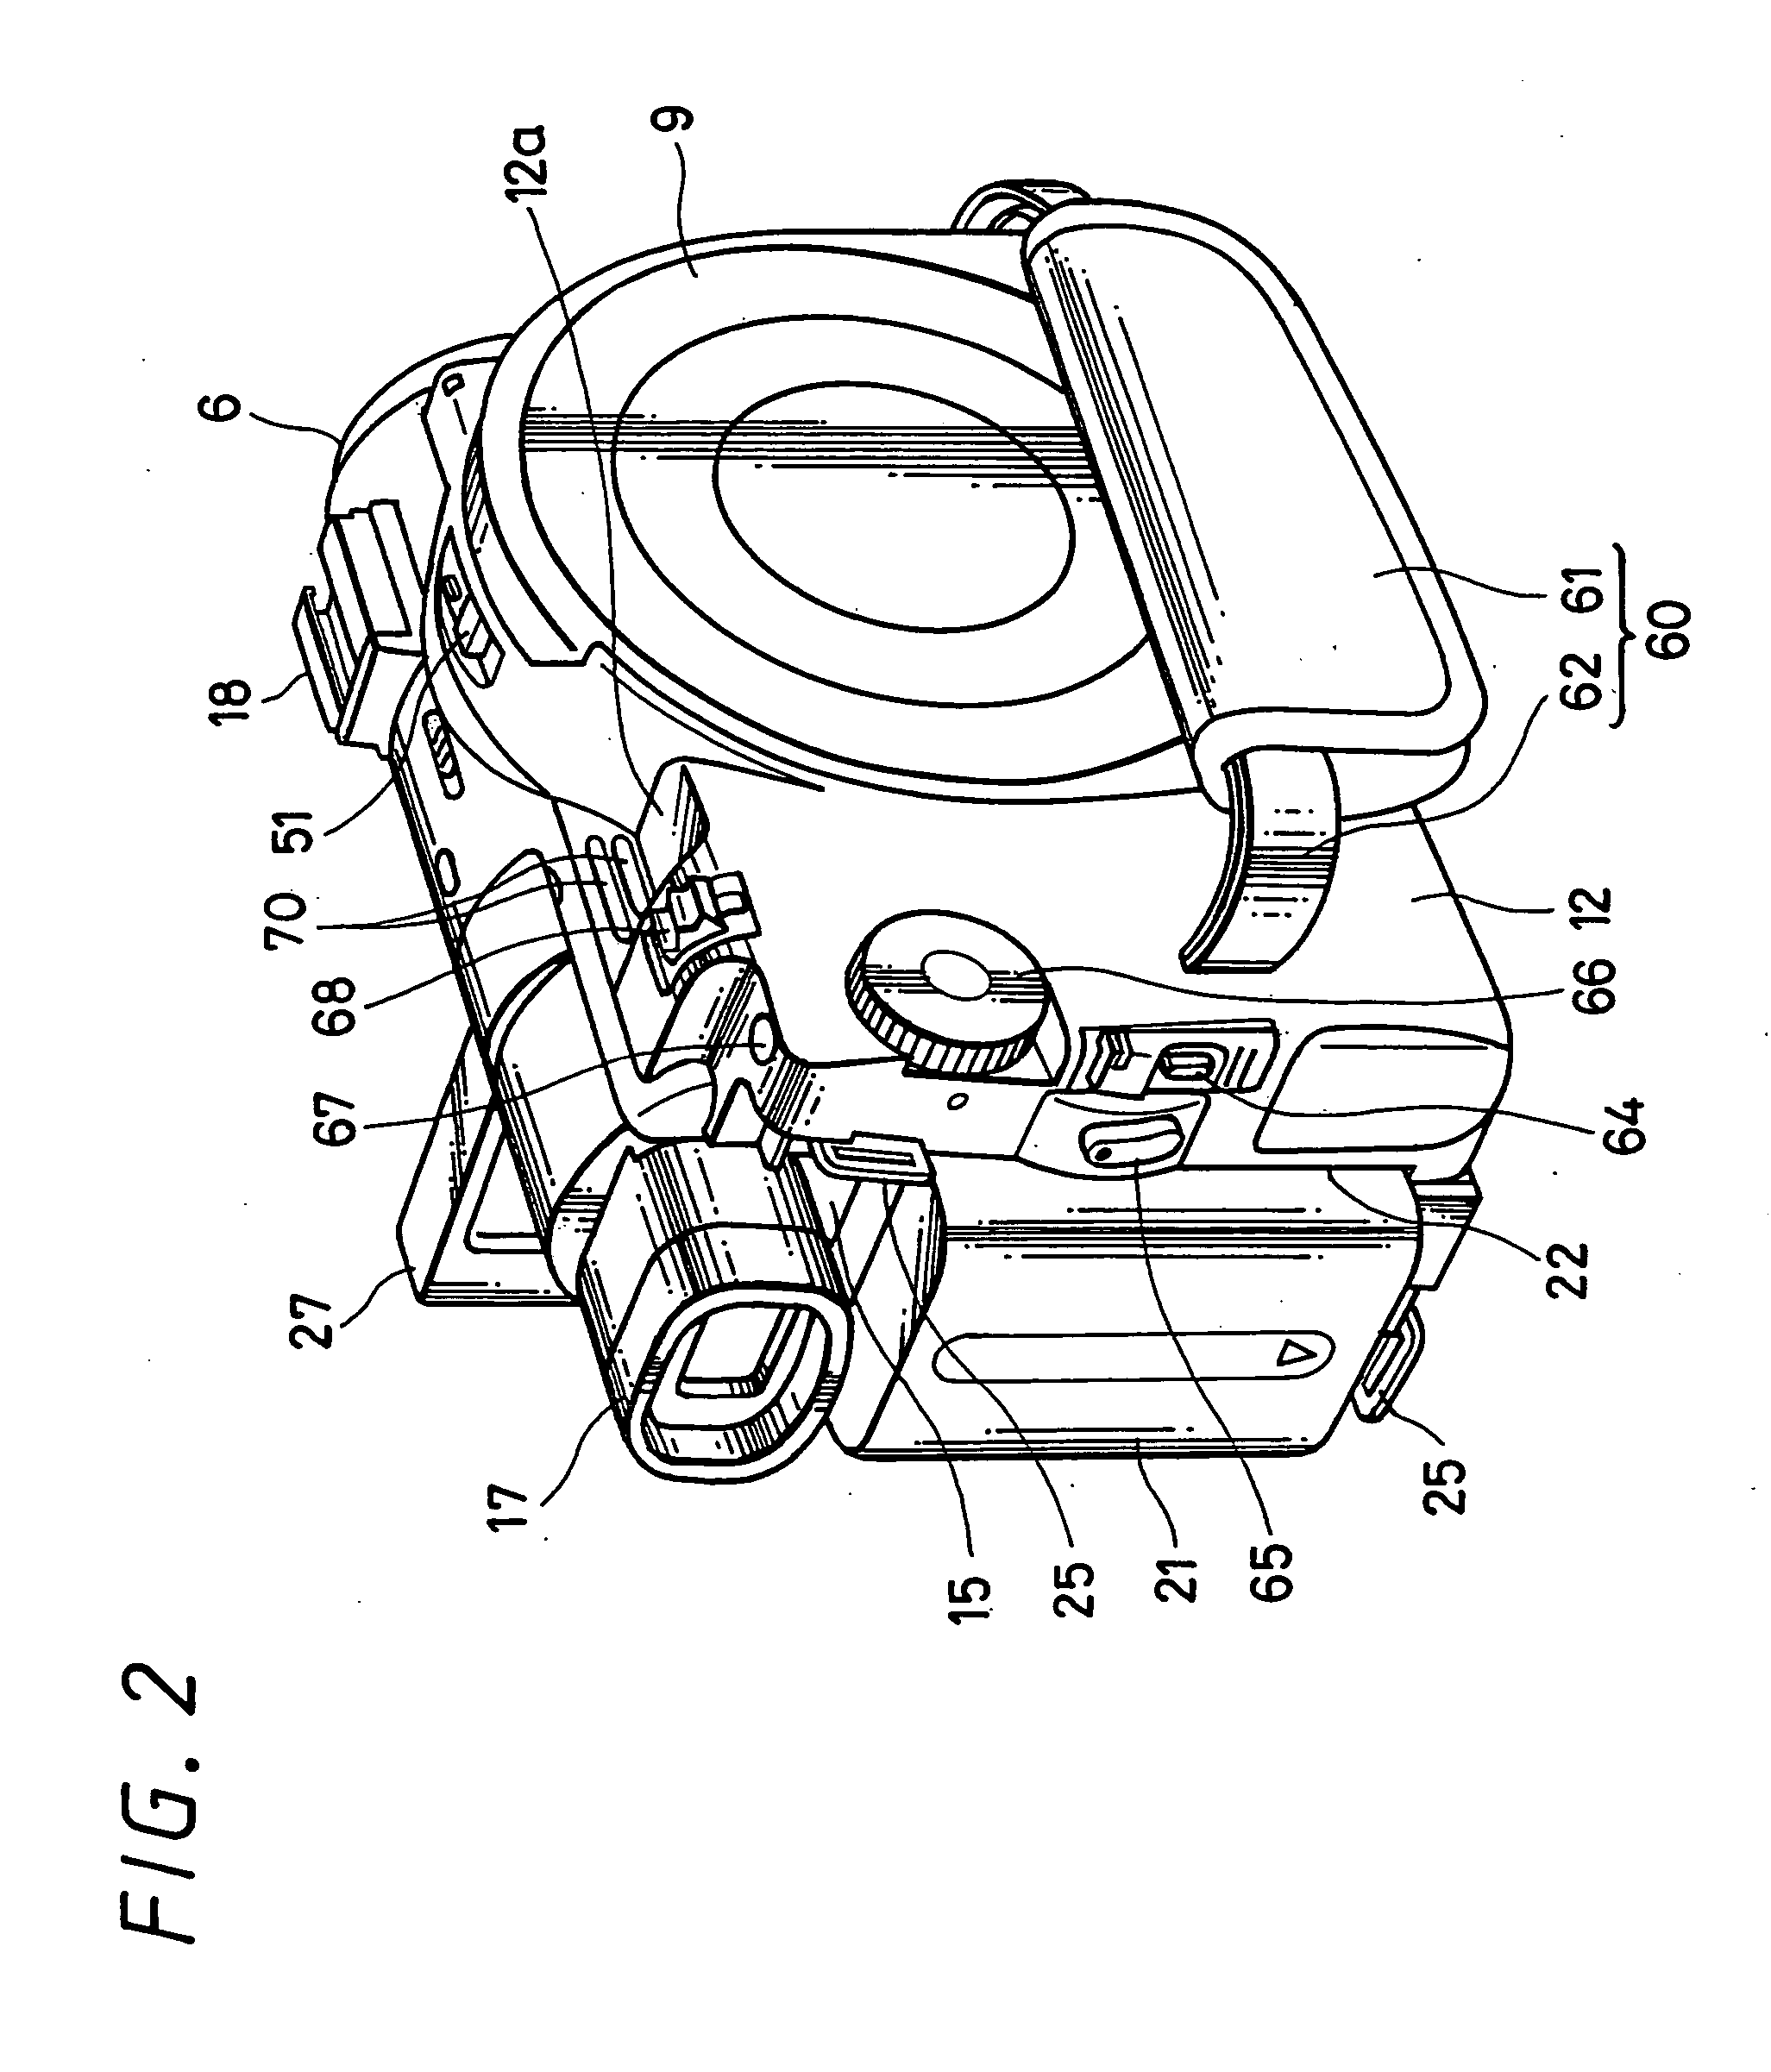 Disc recording and/or reproducing apparatus